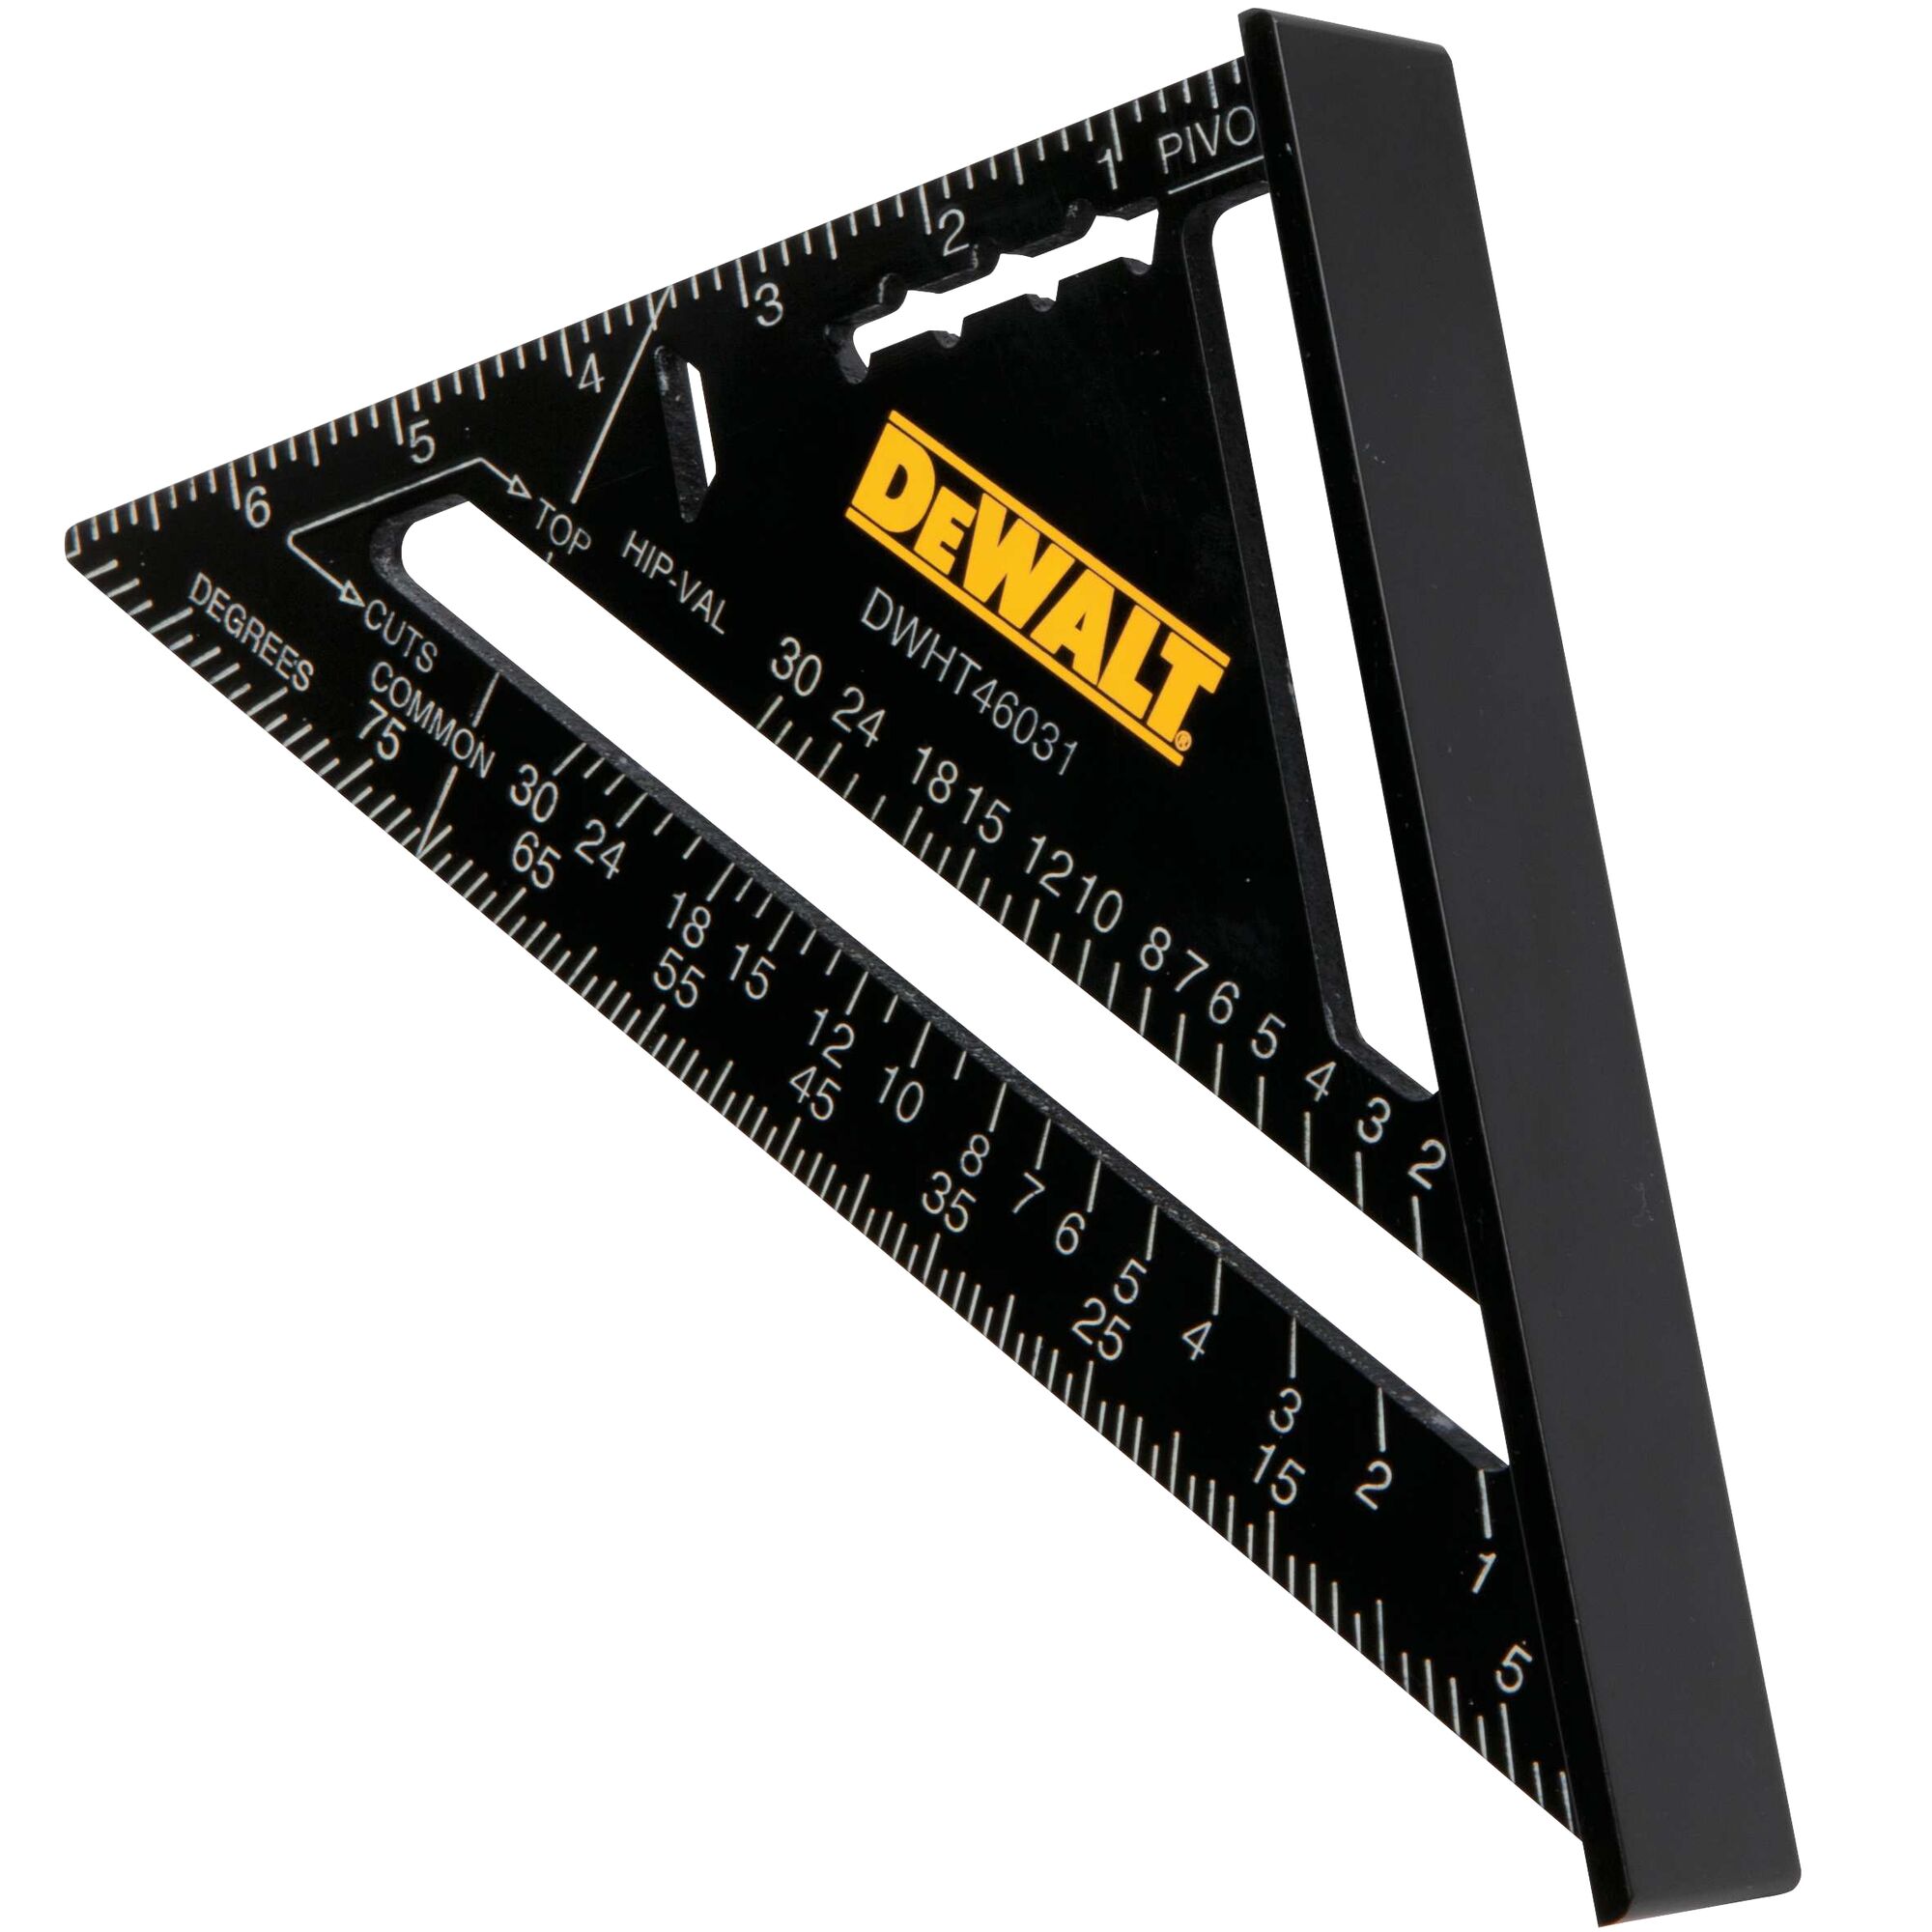 Details about   DeWalt DWHT46031 7 in Premium Aluminum Extra Thick Rafter Square New 